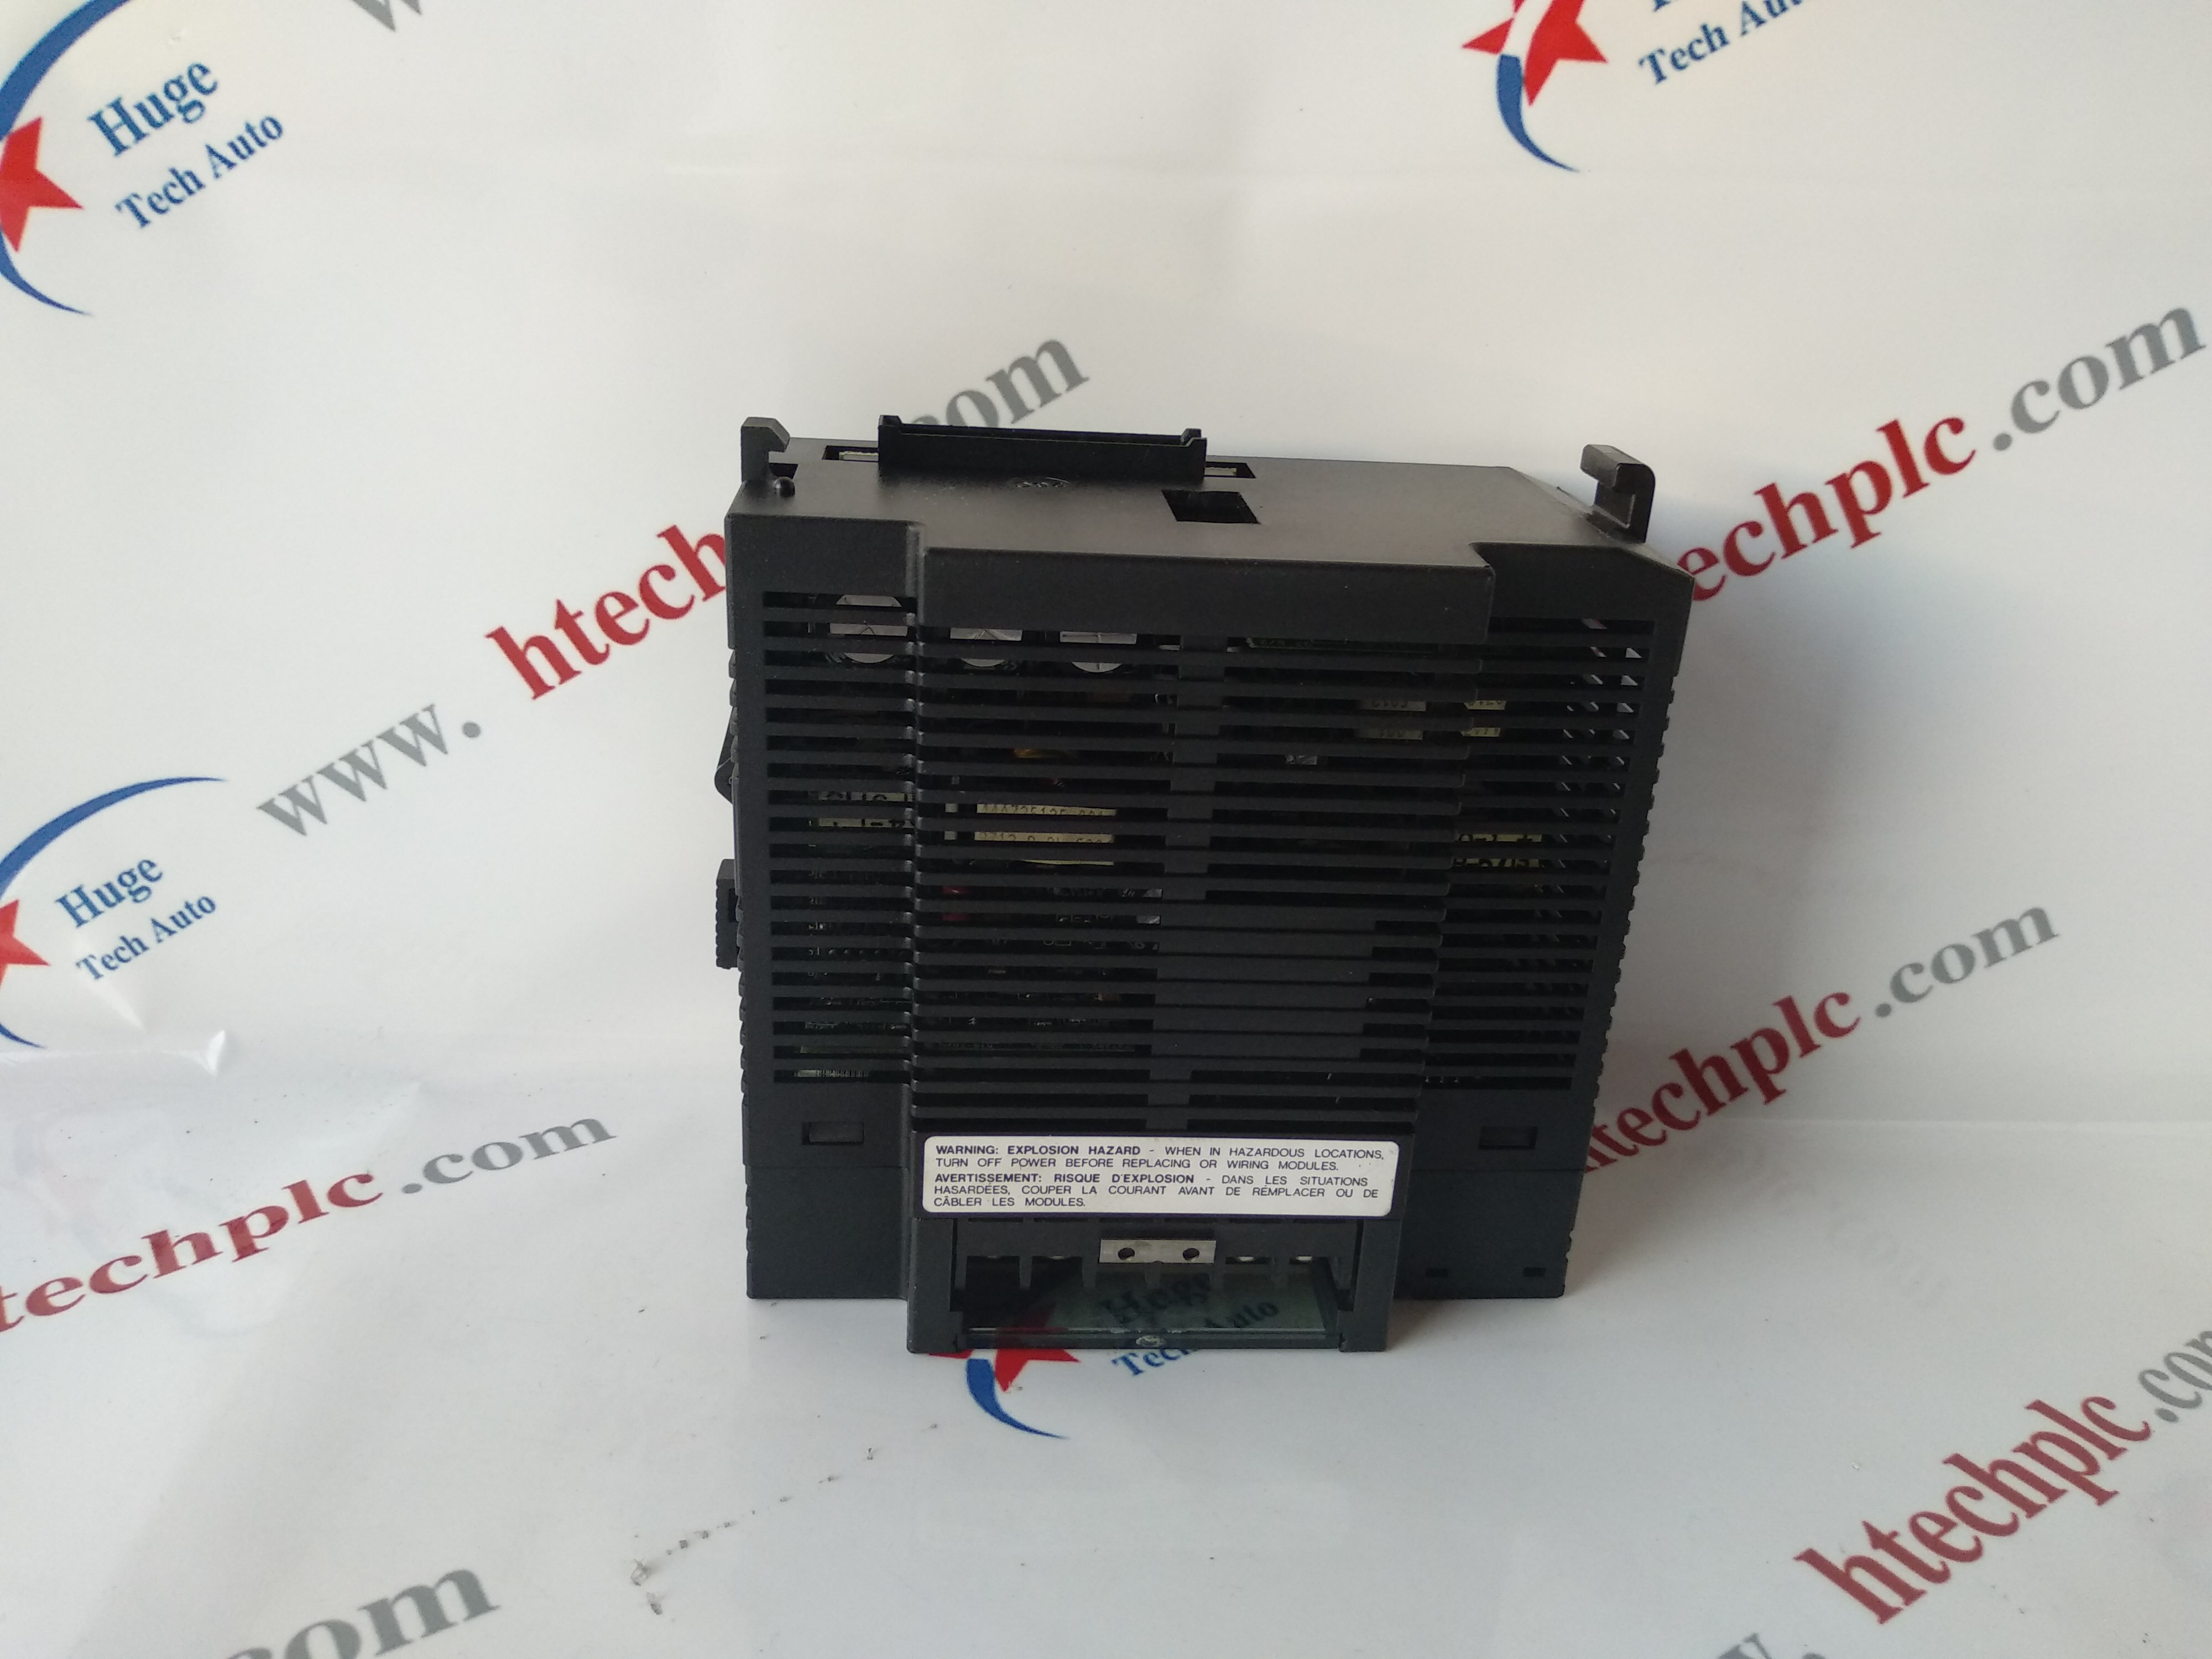 GE 531X139APMAMM7 brand new PLC DCS TSI system spare parts in stock